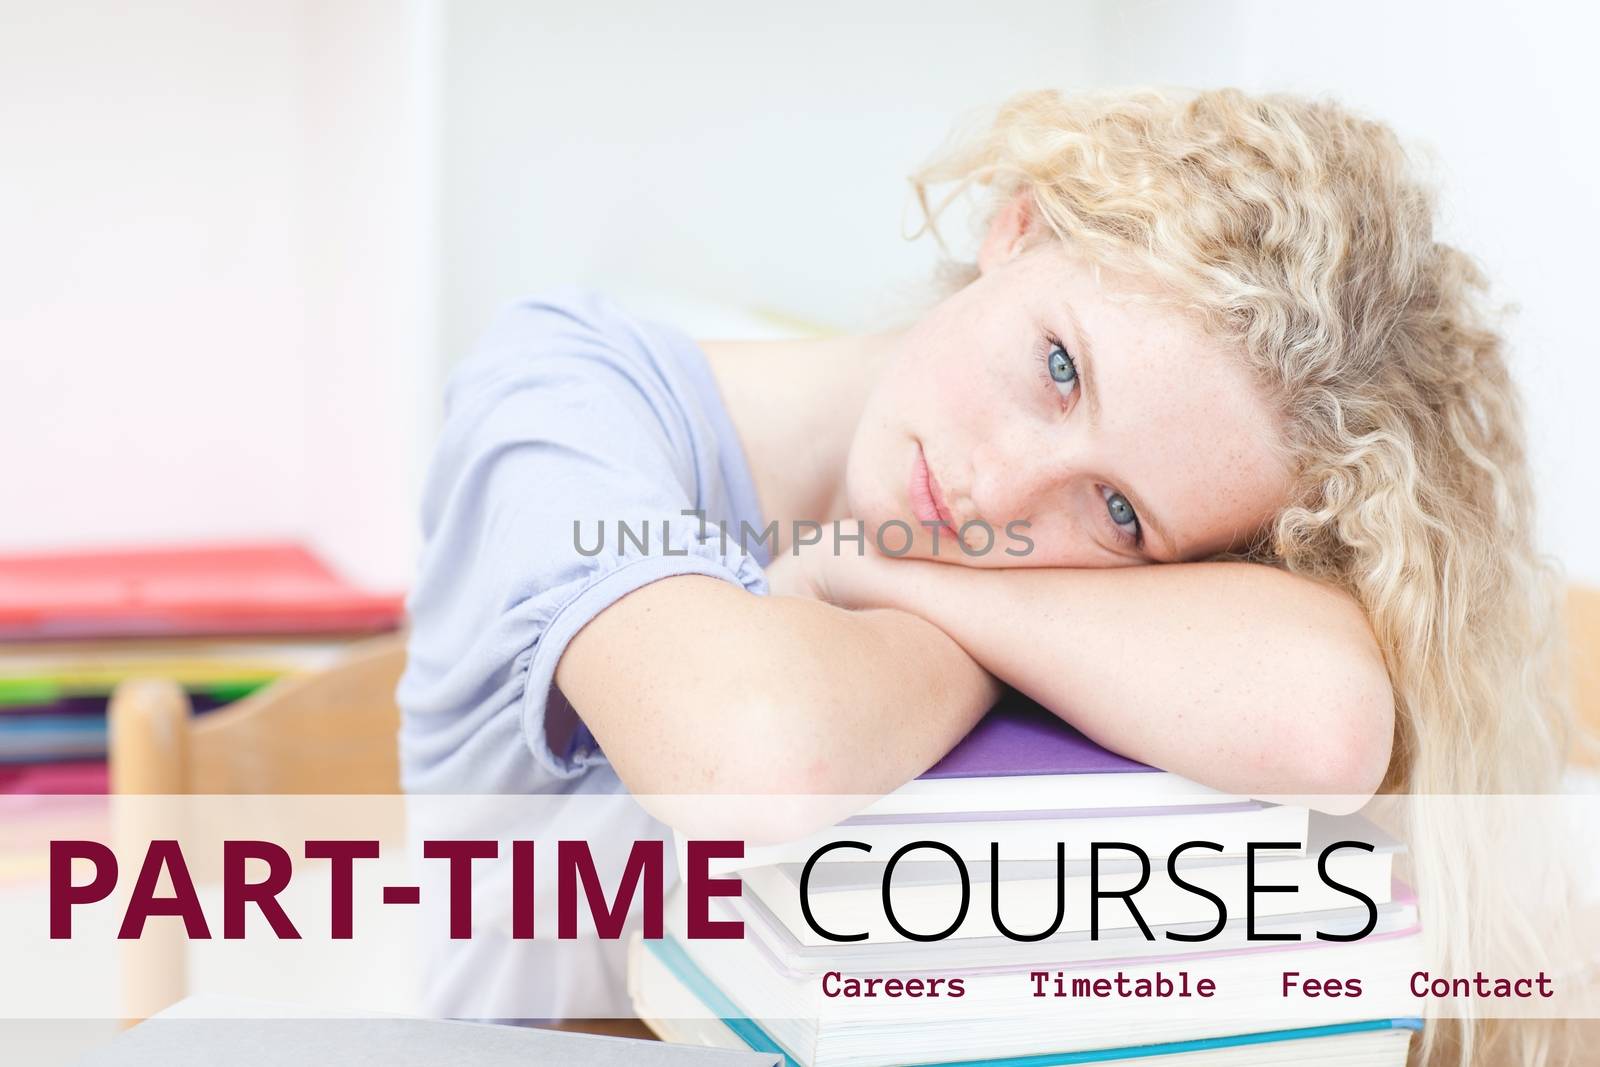 Education and part-time courses text and woman lying on books by Wavebreakmedia